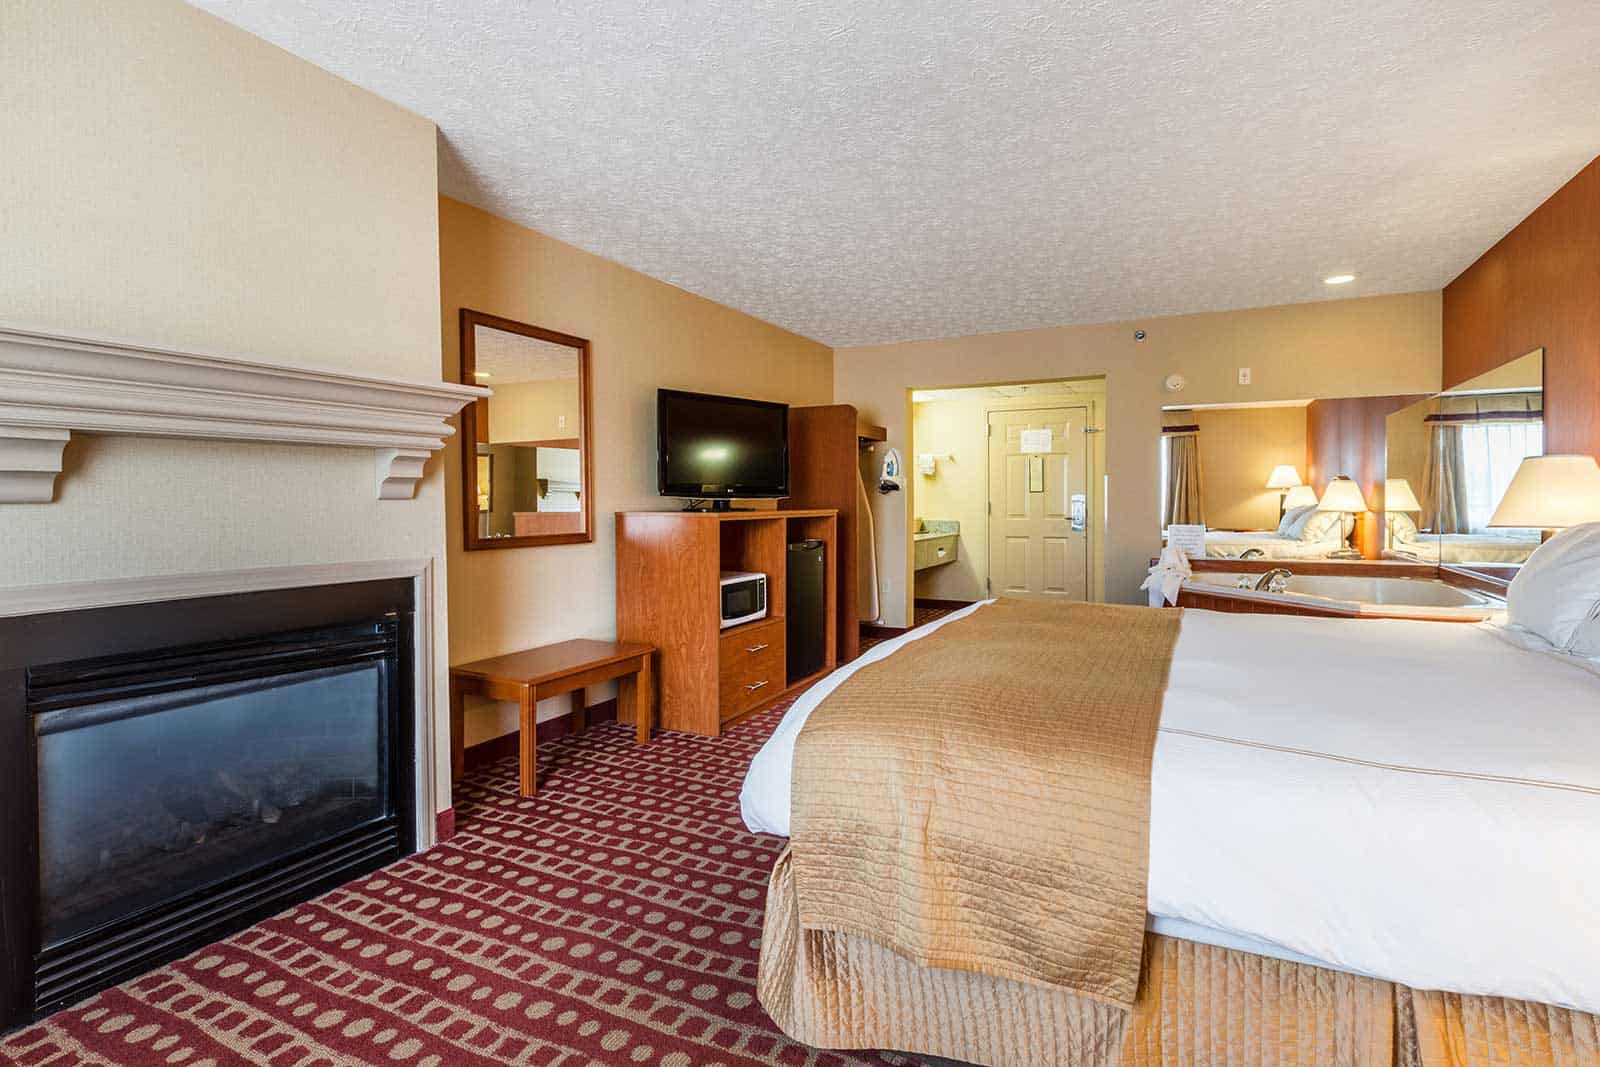 King Suite with Jacuzzi - Park Grove Inn - In The Heart of Pigeon Forge1600 x 1067